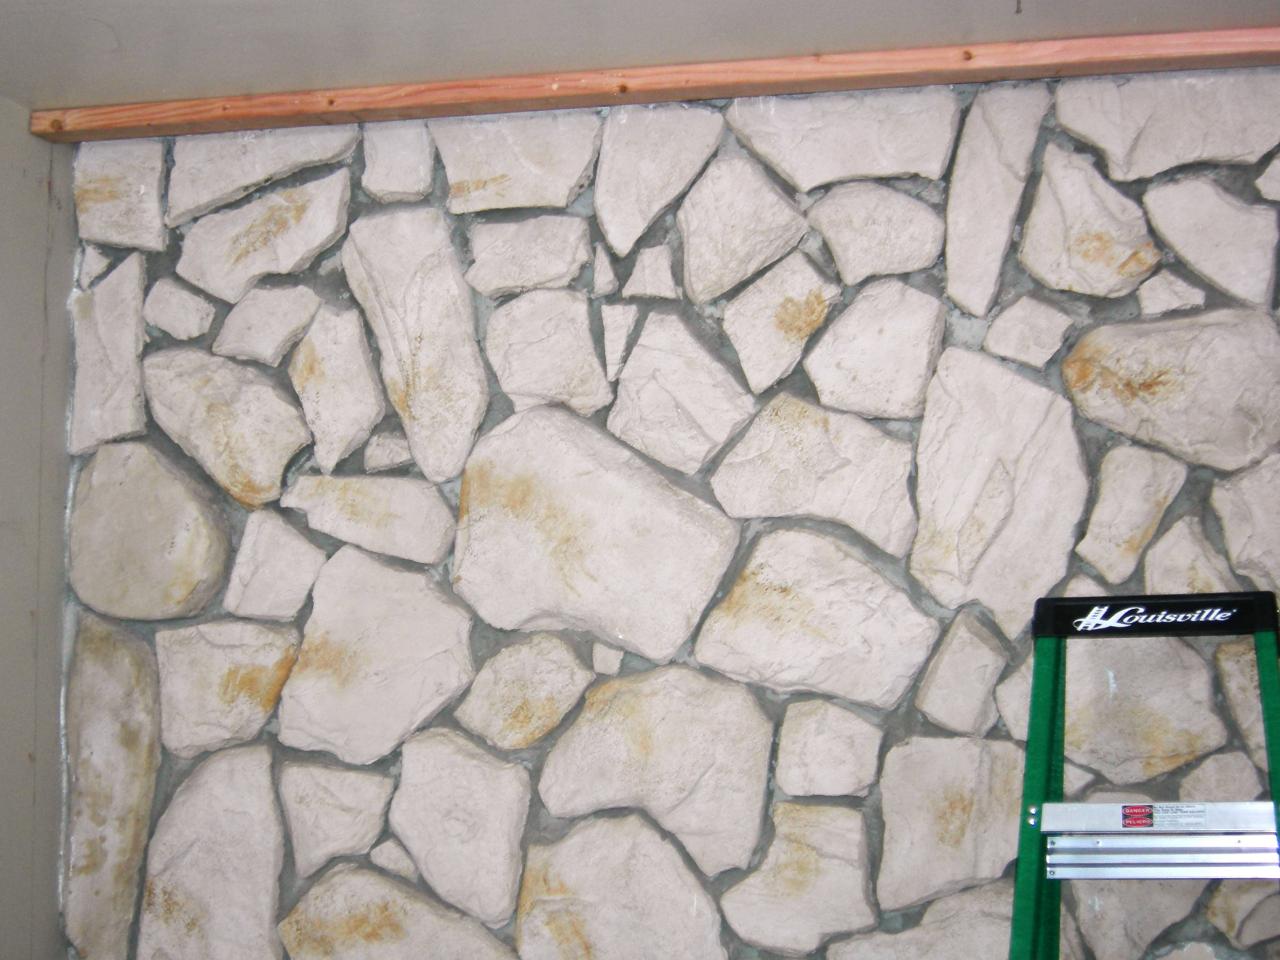 Build A Standard Wall Over Stone, How To Install Natural Stone Veneer On Fireplace Drywall